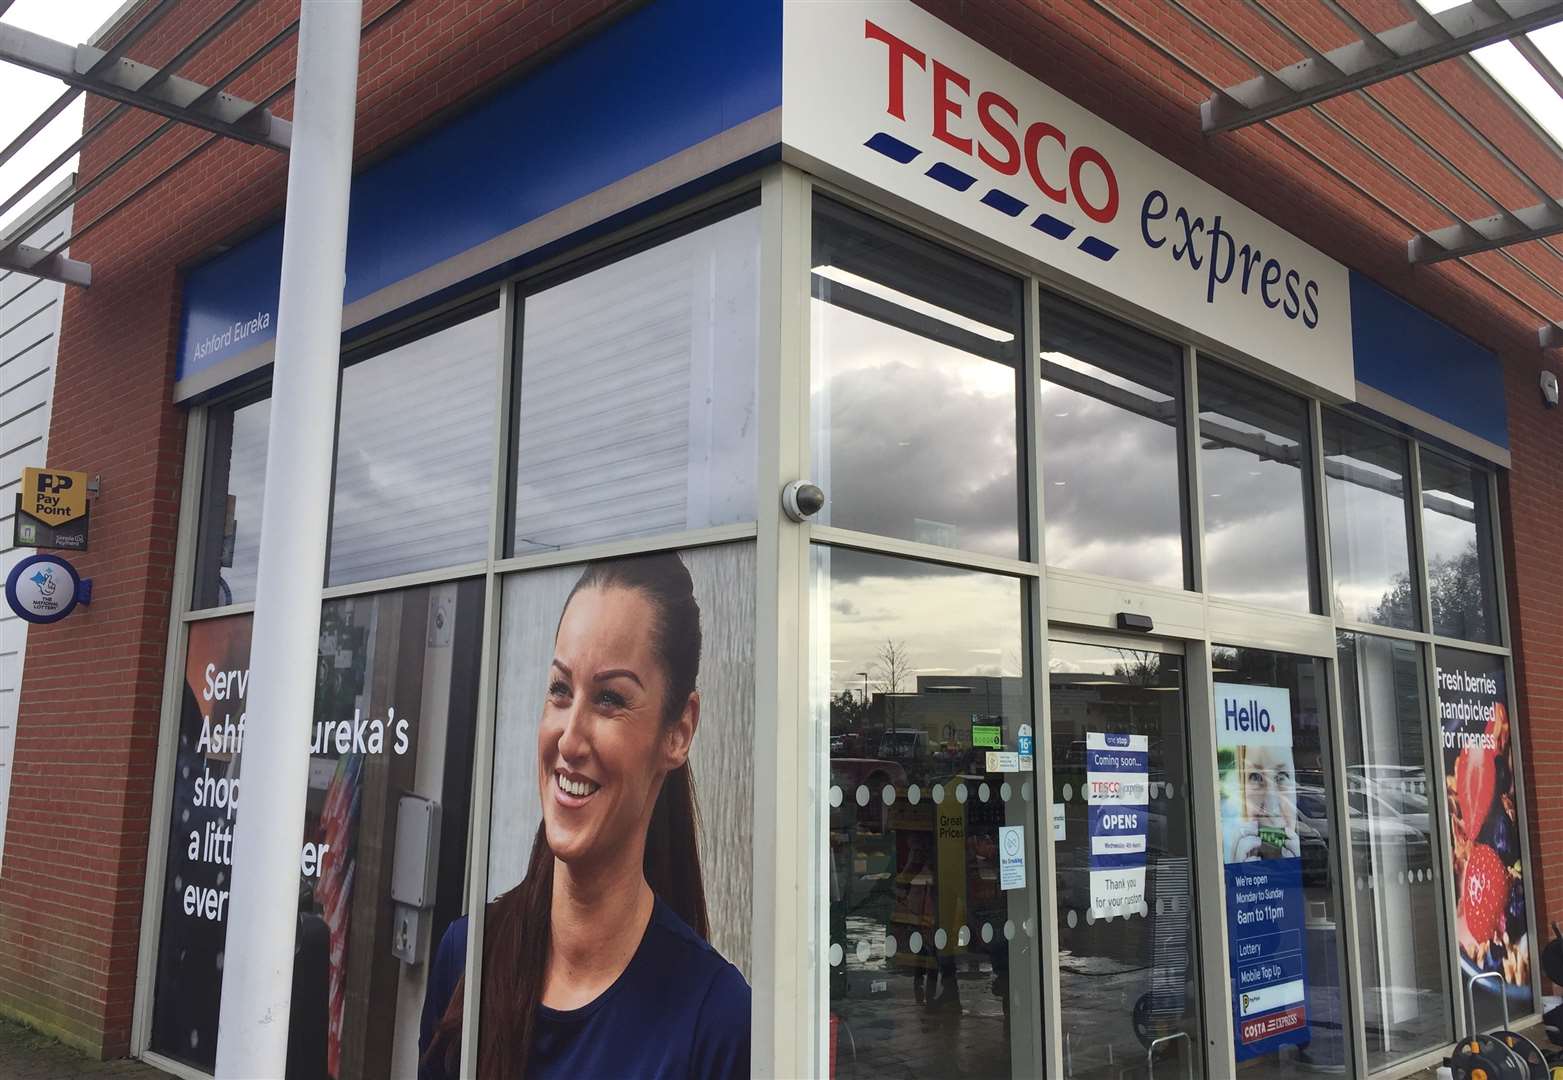 The new Tesco store will be opening tomorrow